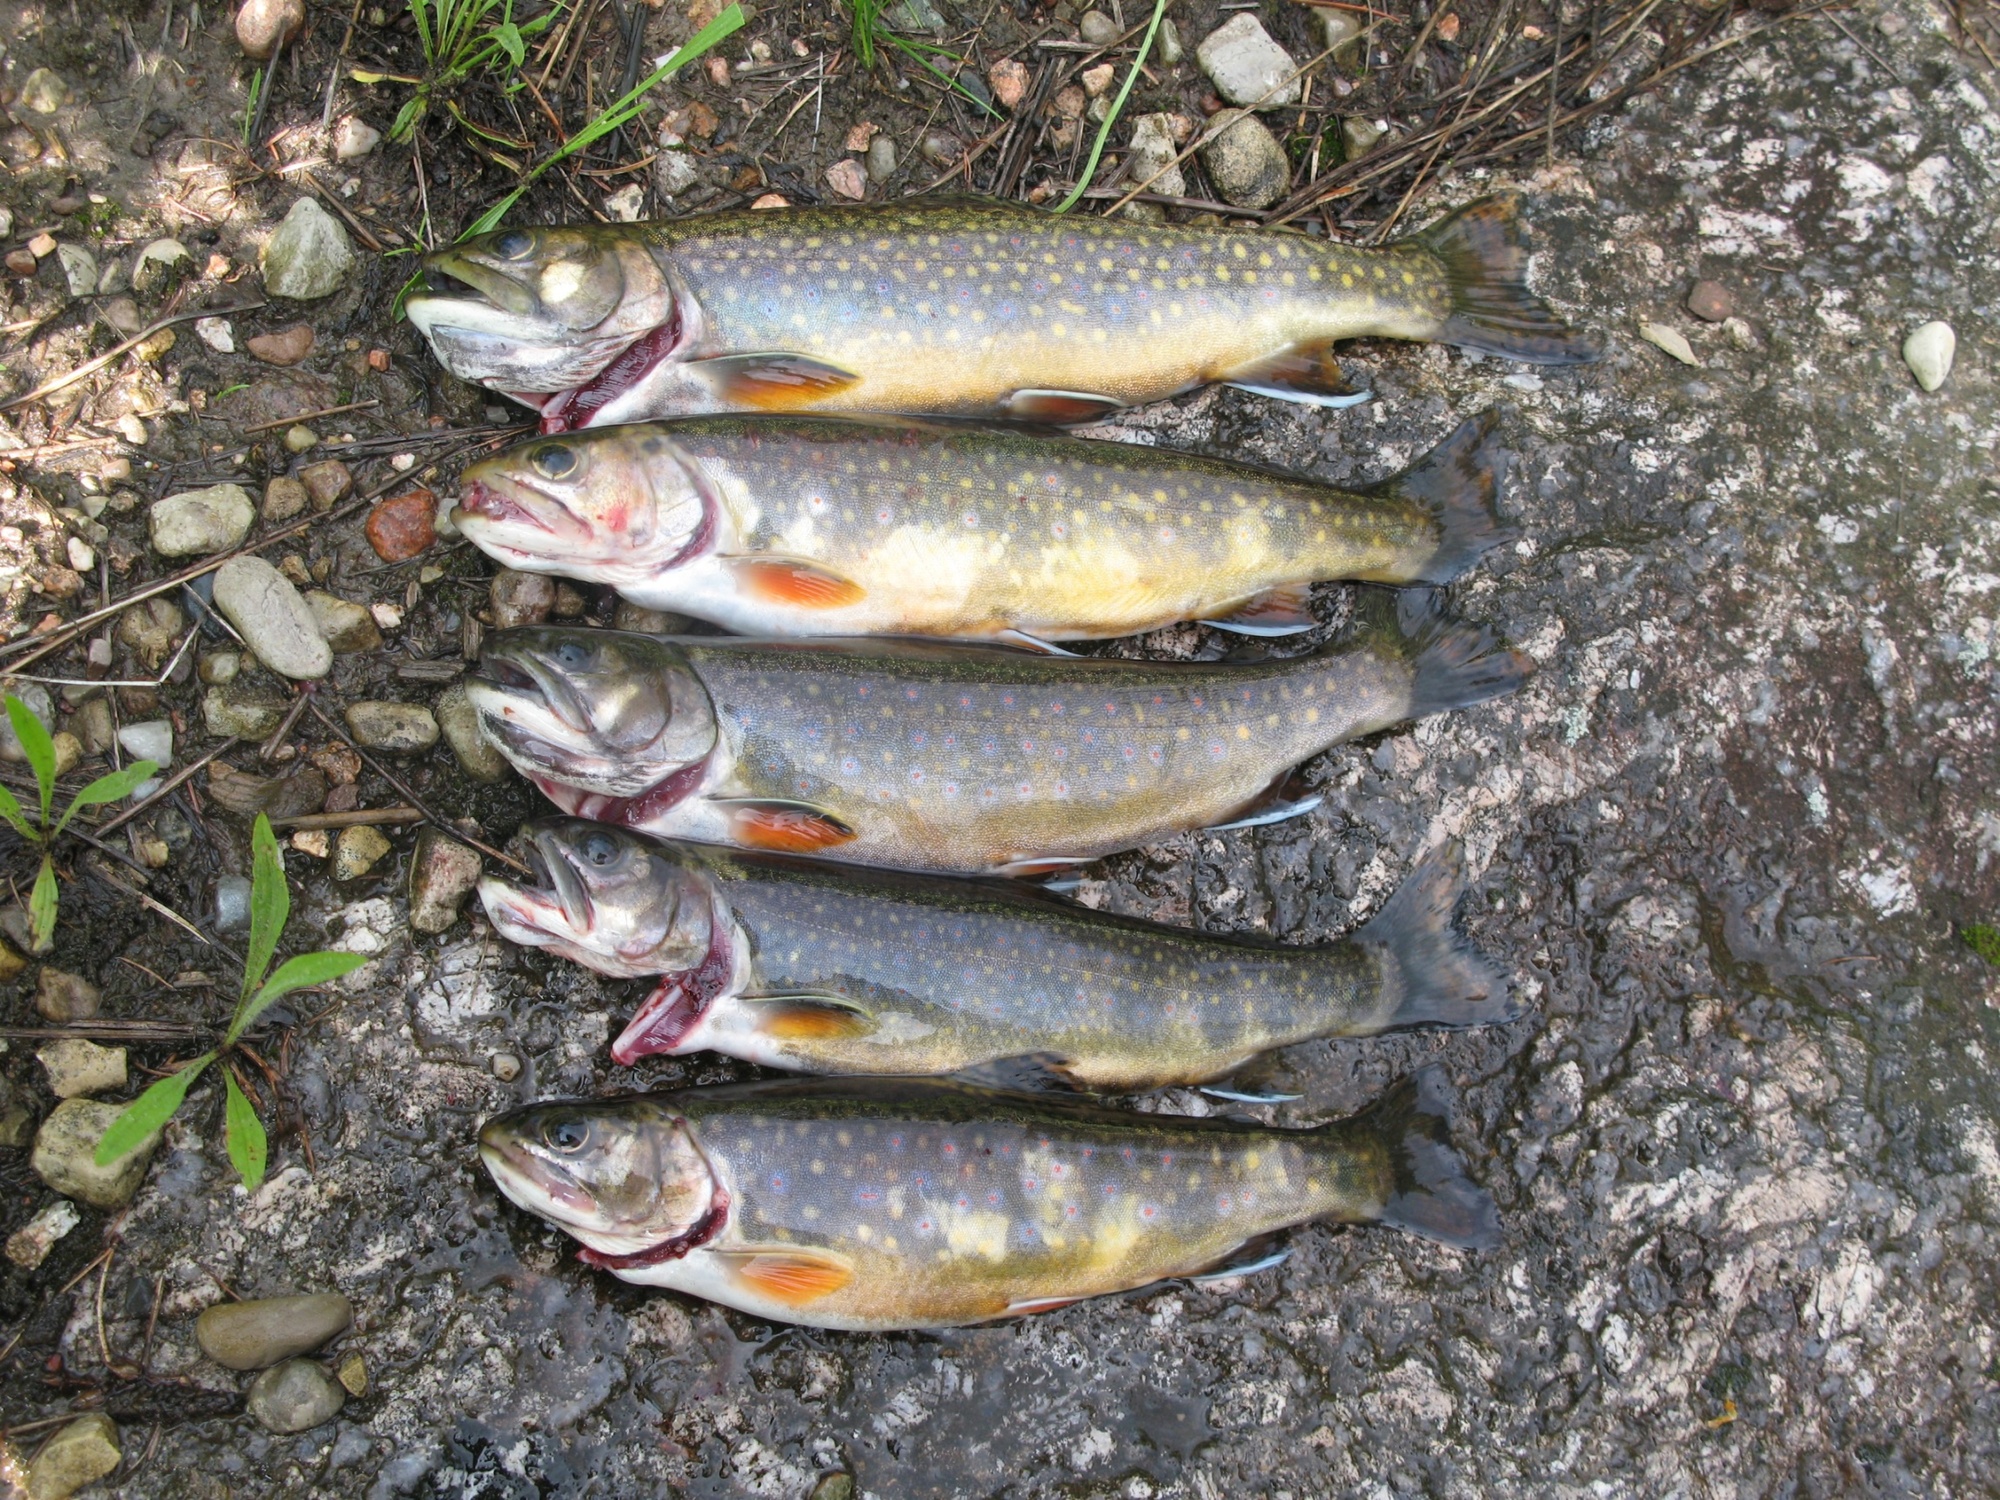 A spring brook trout catch from the Upper Peninsula.